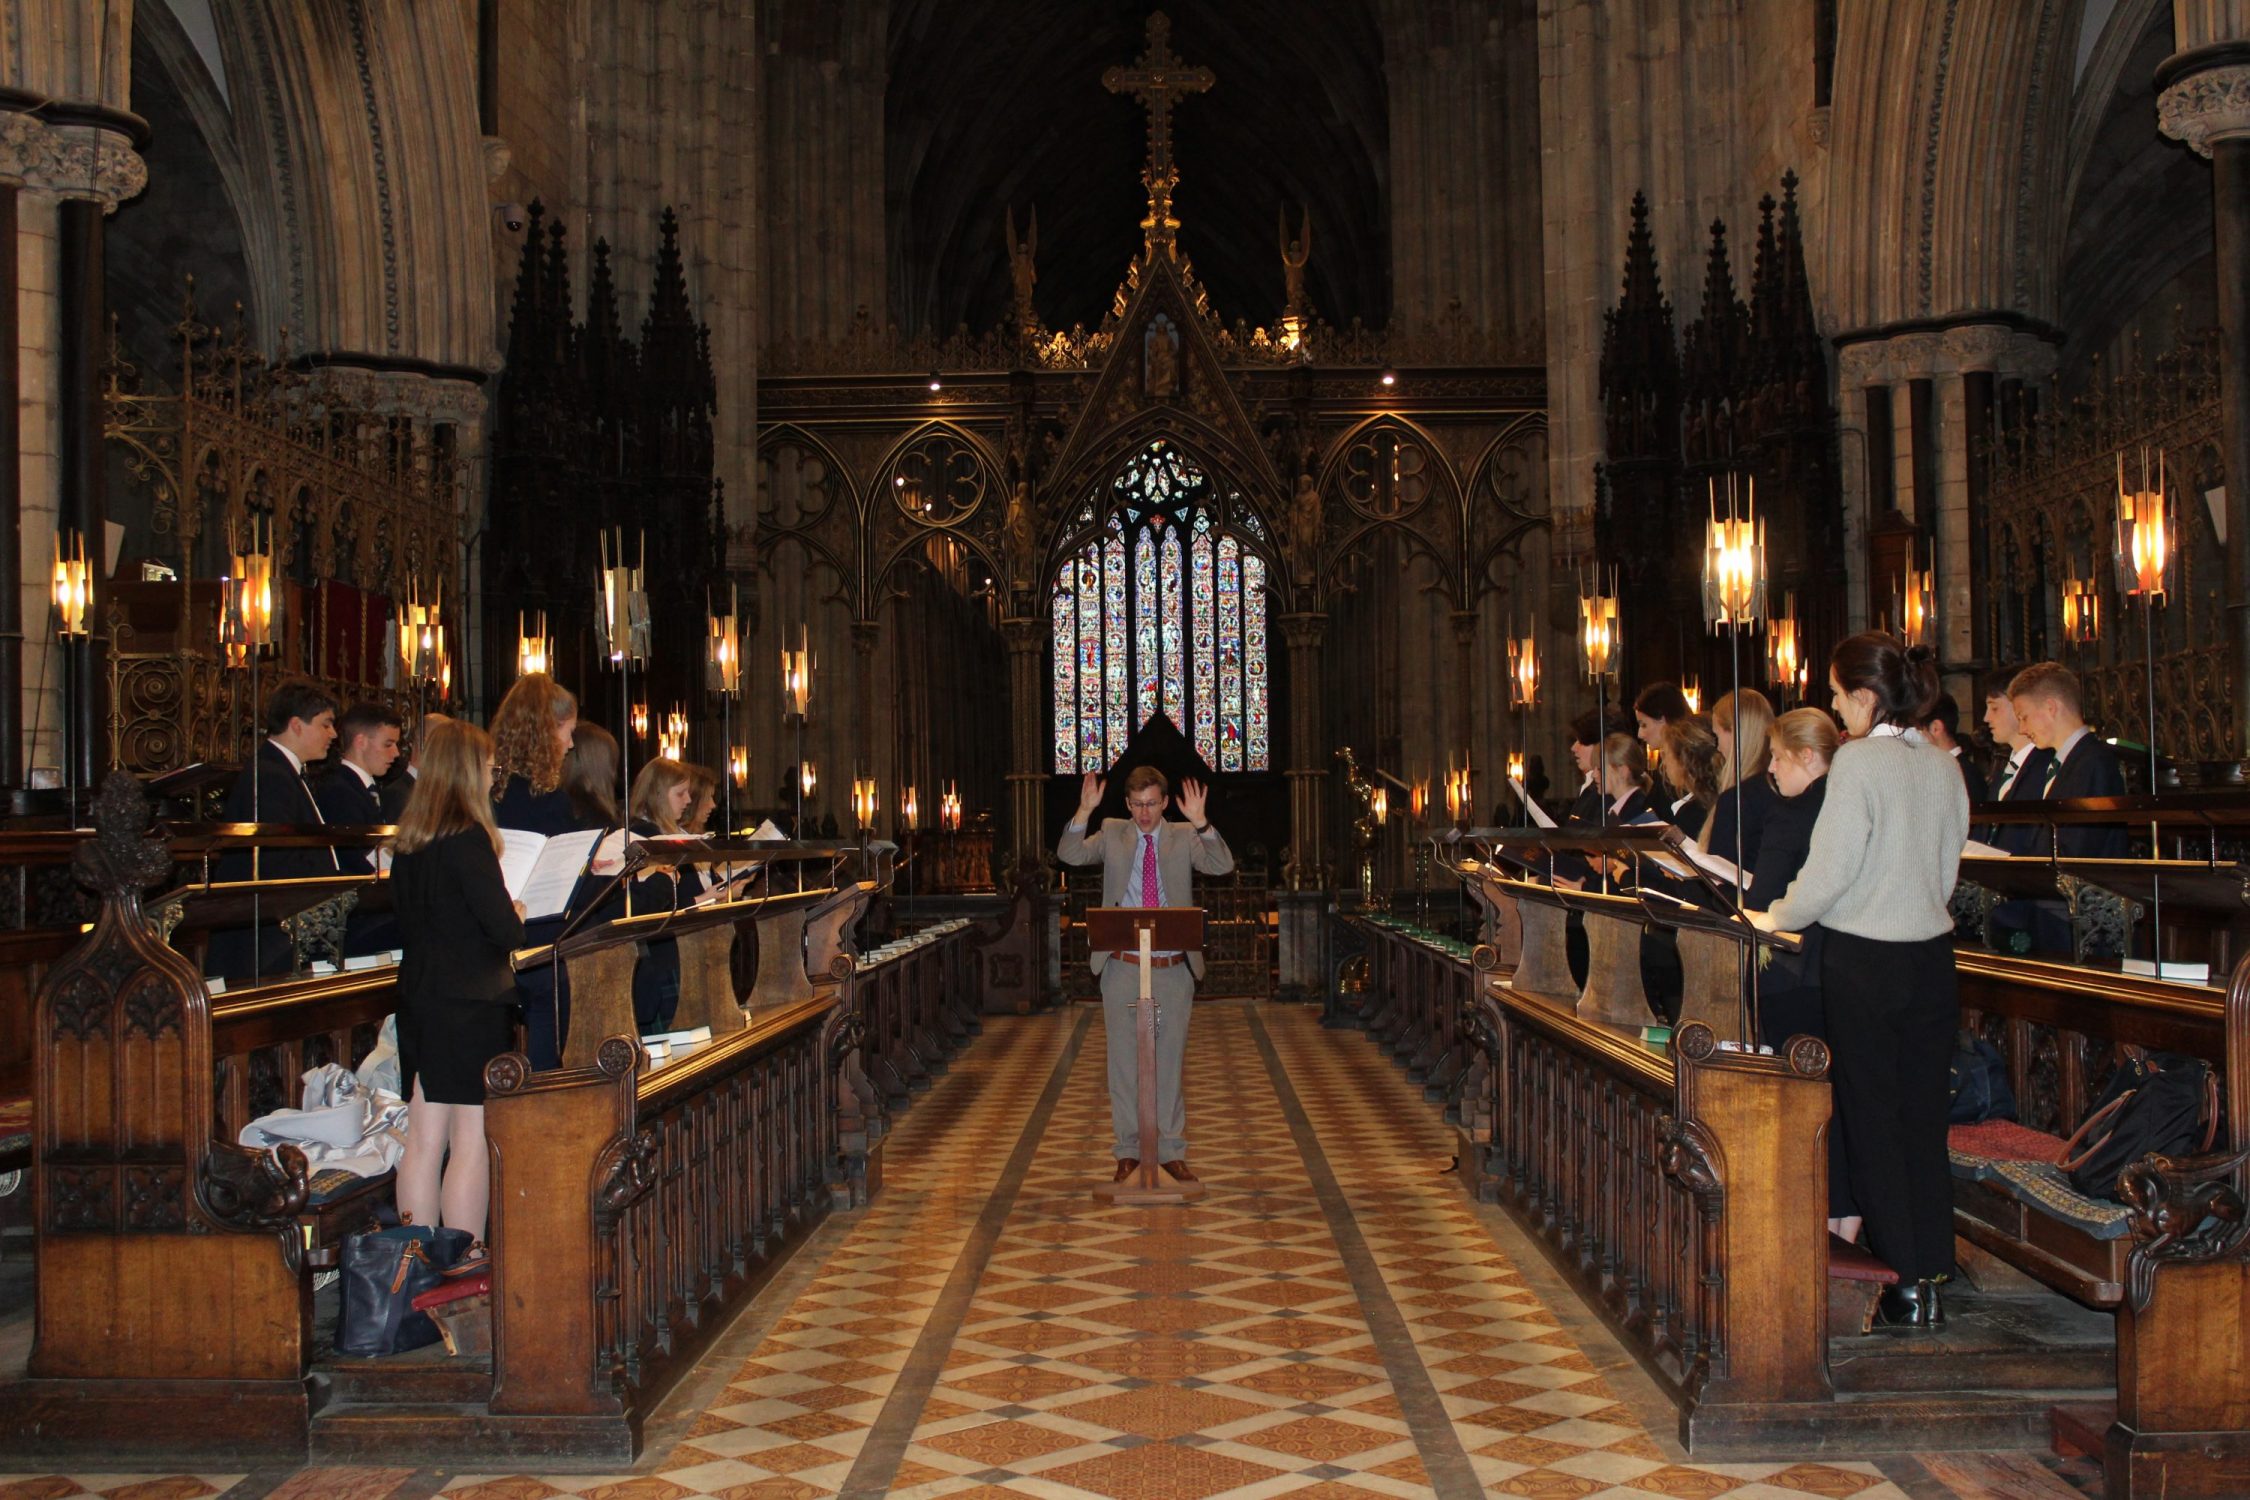 Choral delight at Evensong